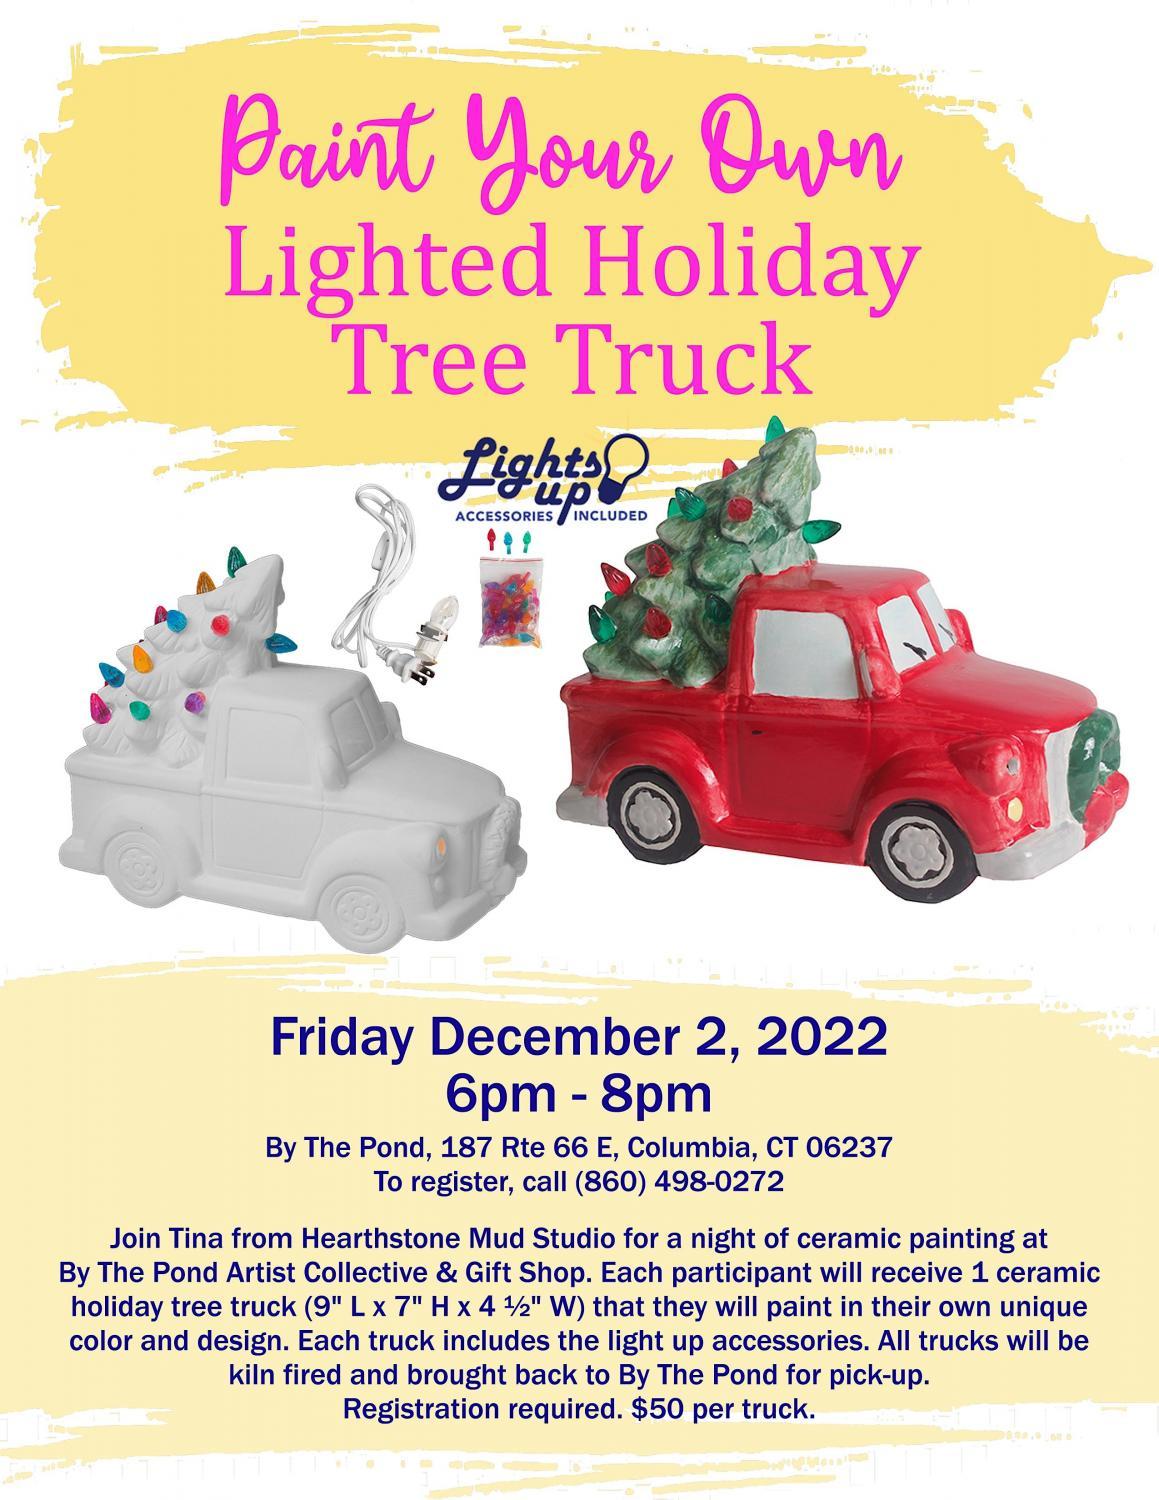 Paint Your Own Pottery: Lighted Holiday Tree Truck
Fri Dec 2, 7:00 PM - Fri Dec 2, 7:00 PM
in 28 days